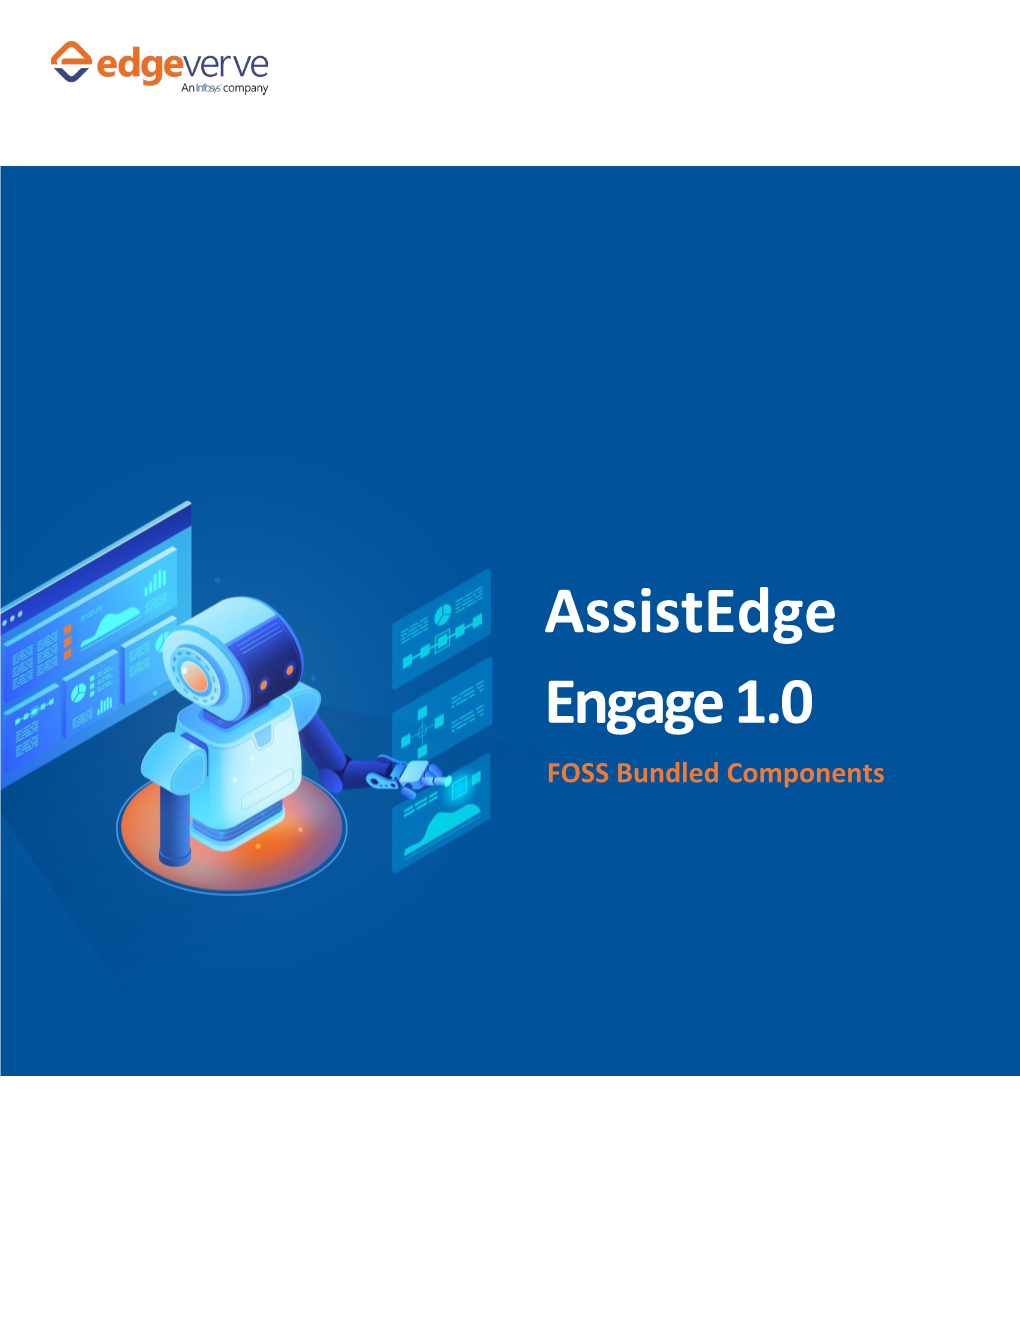 FOSS Components Along with Their License Name with Version Which Are Packaged with “Assistedge Engage Enterprise Edition 1.0”